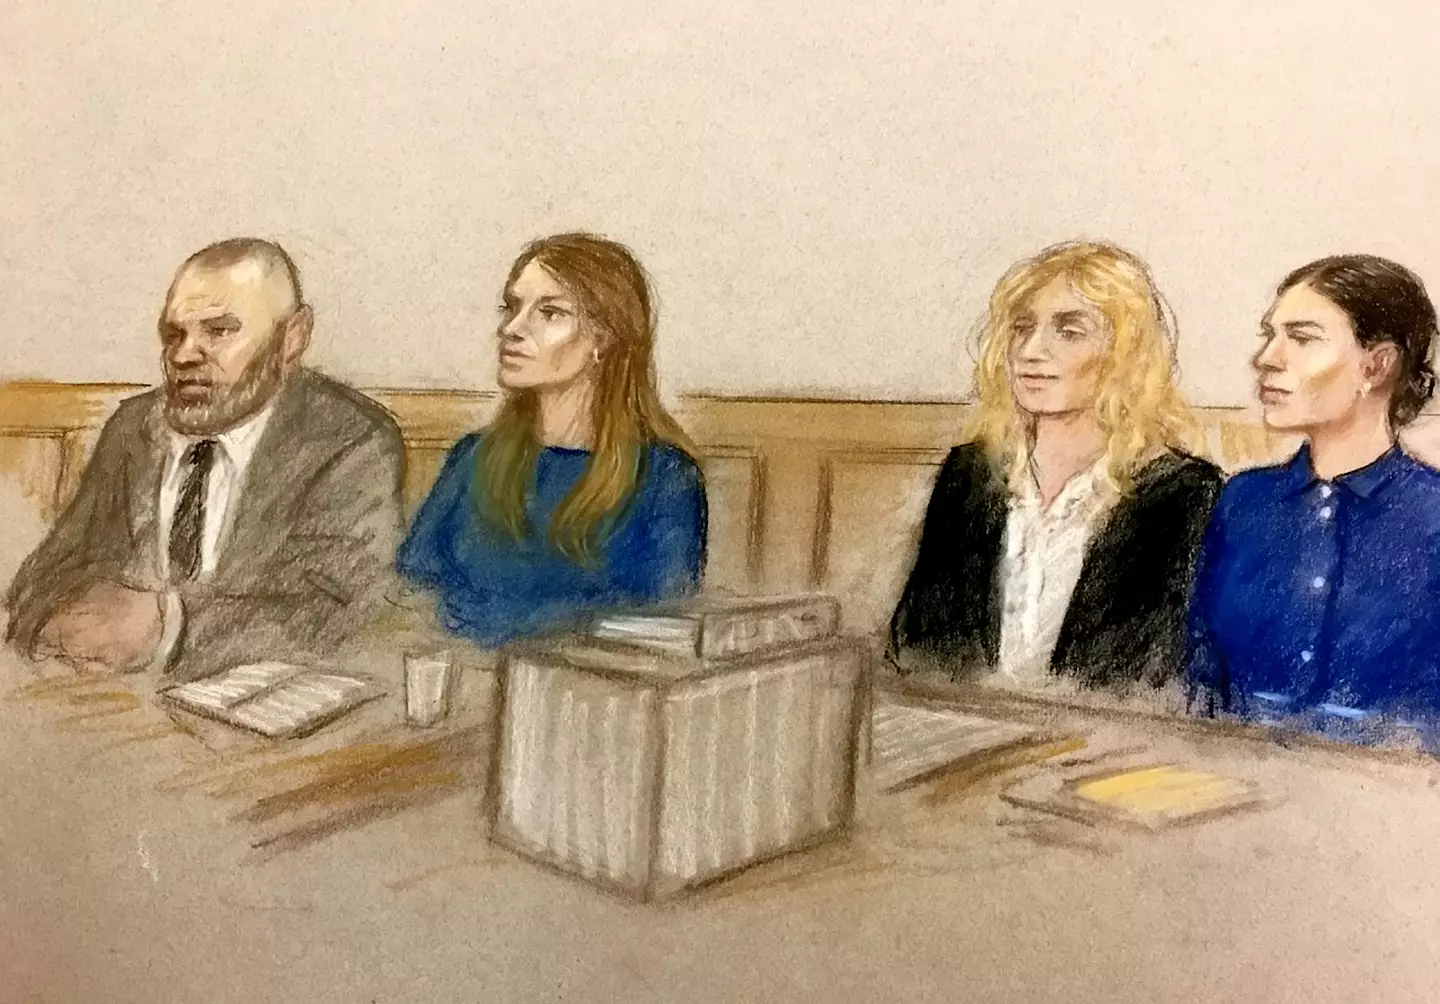 The sketch artist depicted Wayne and Coleen in court.